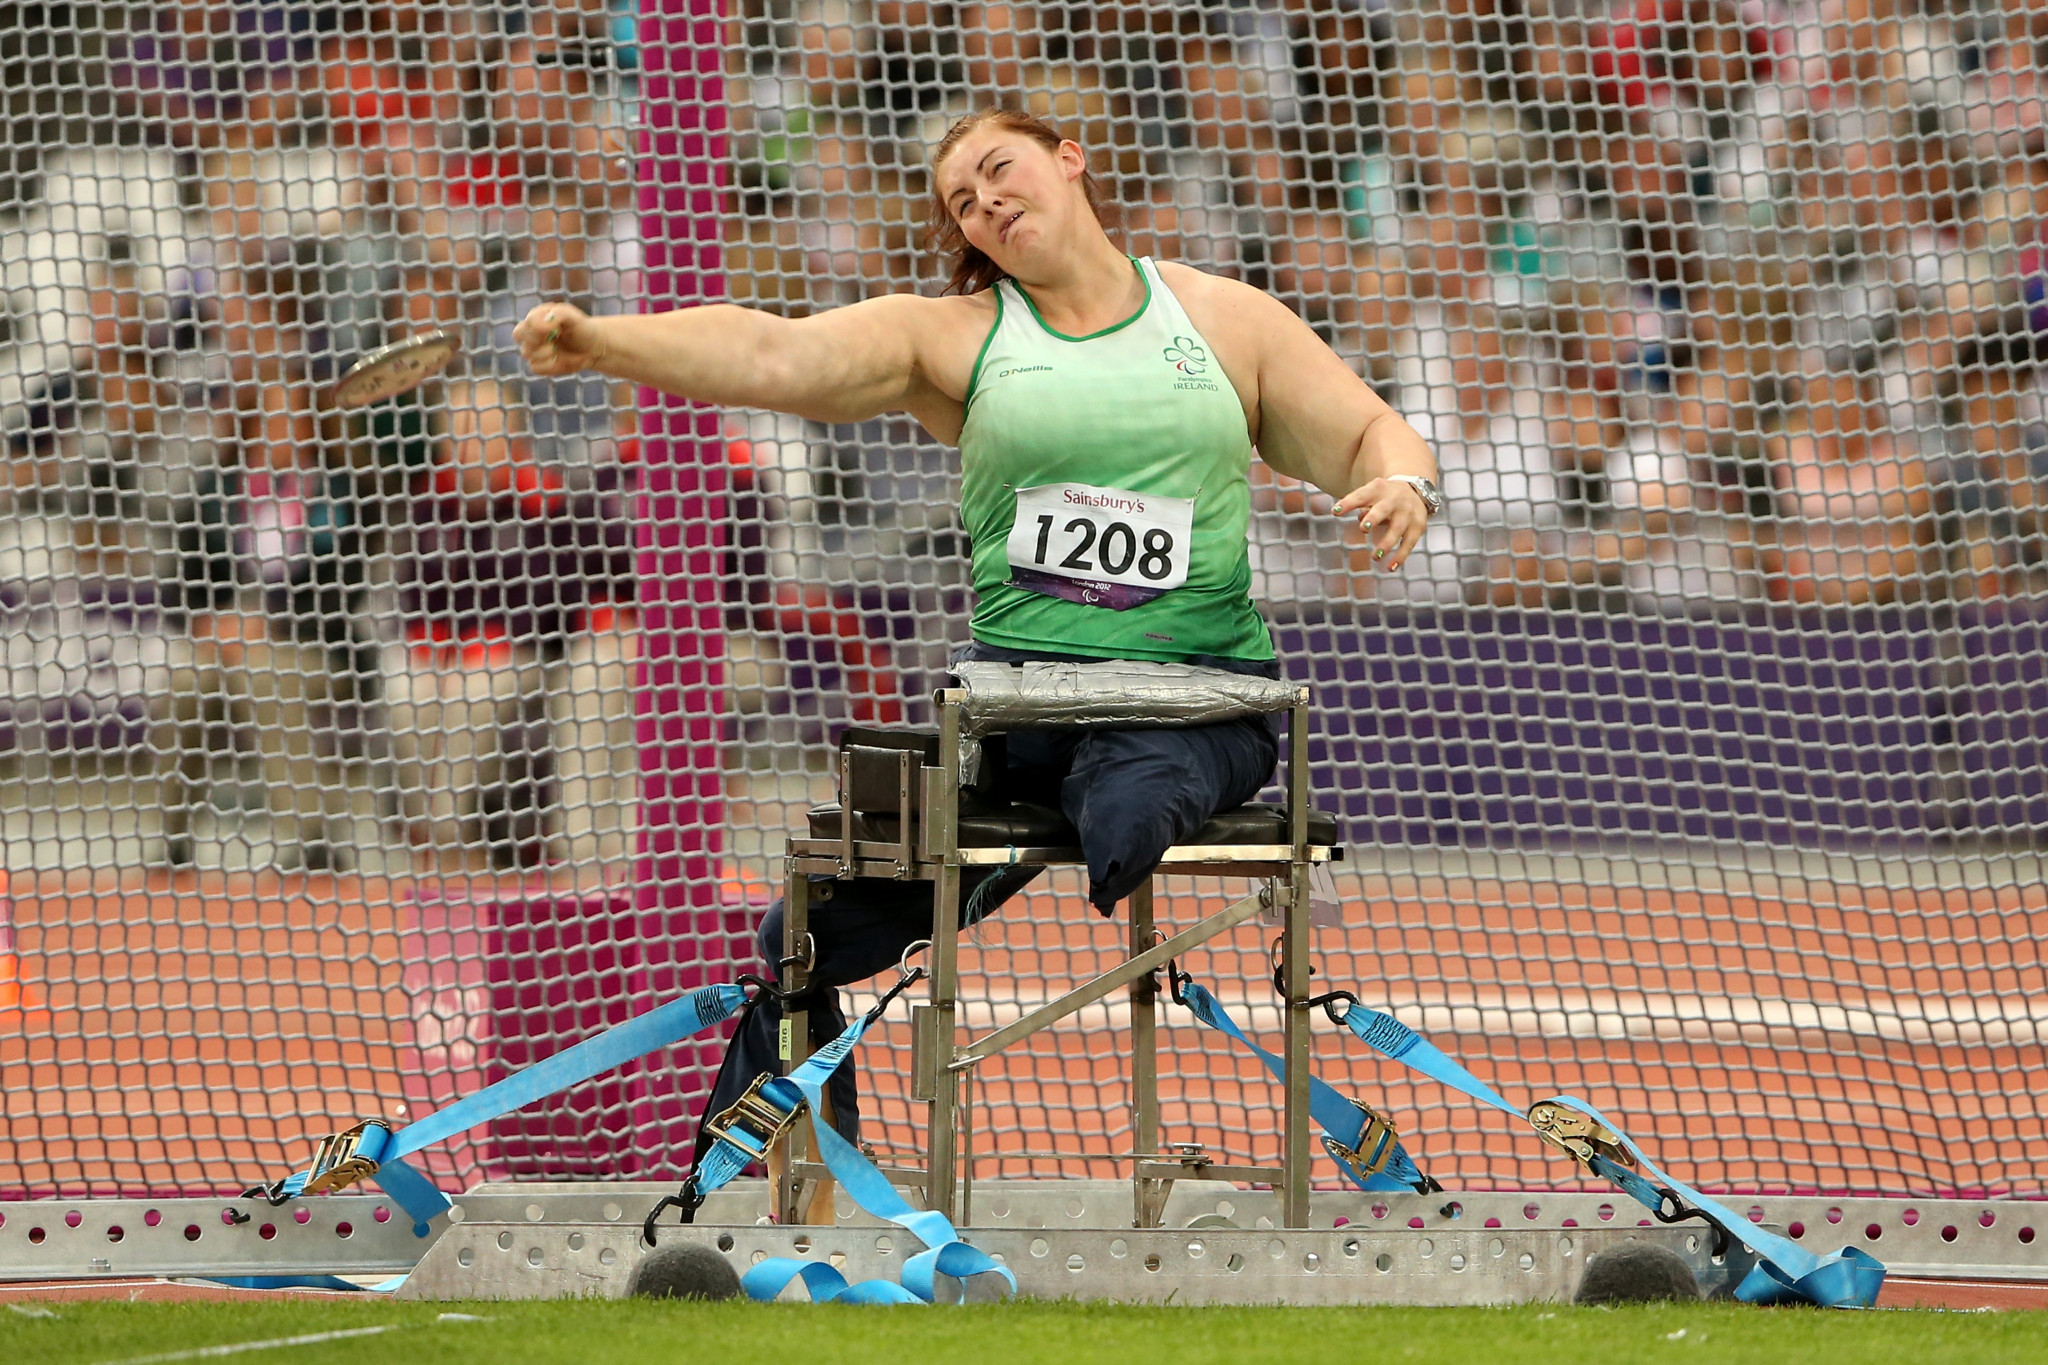 Orla Barry won two Paralympic medals in her career ©Getty Images